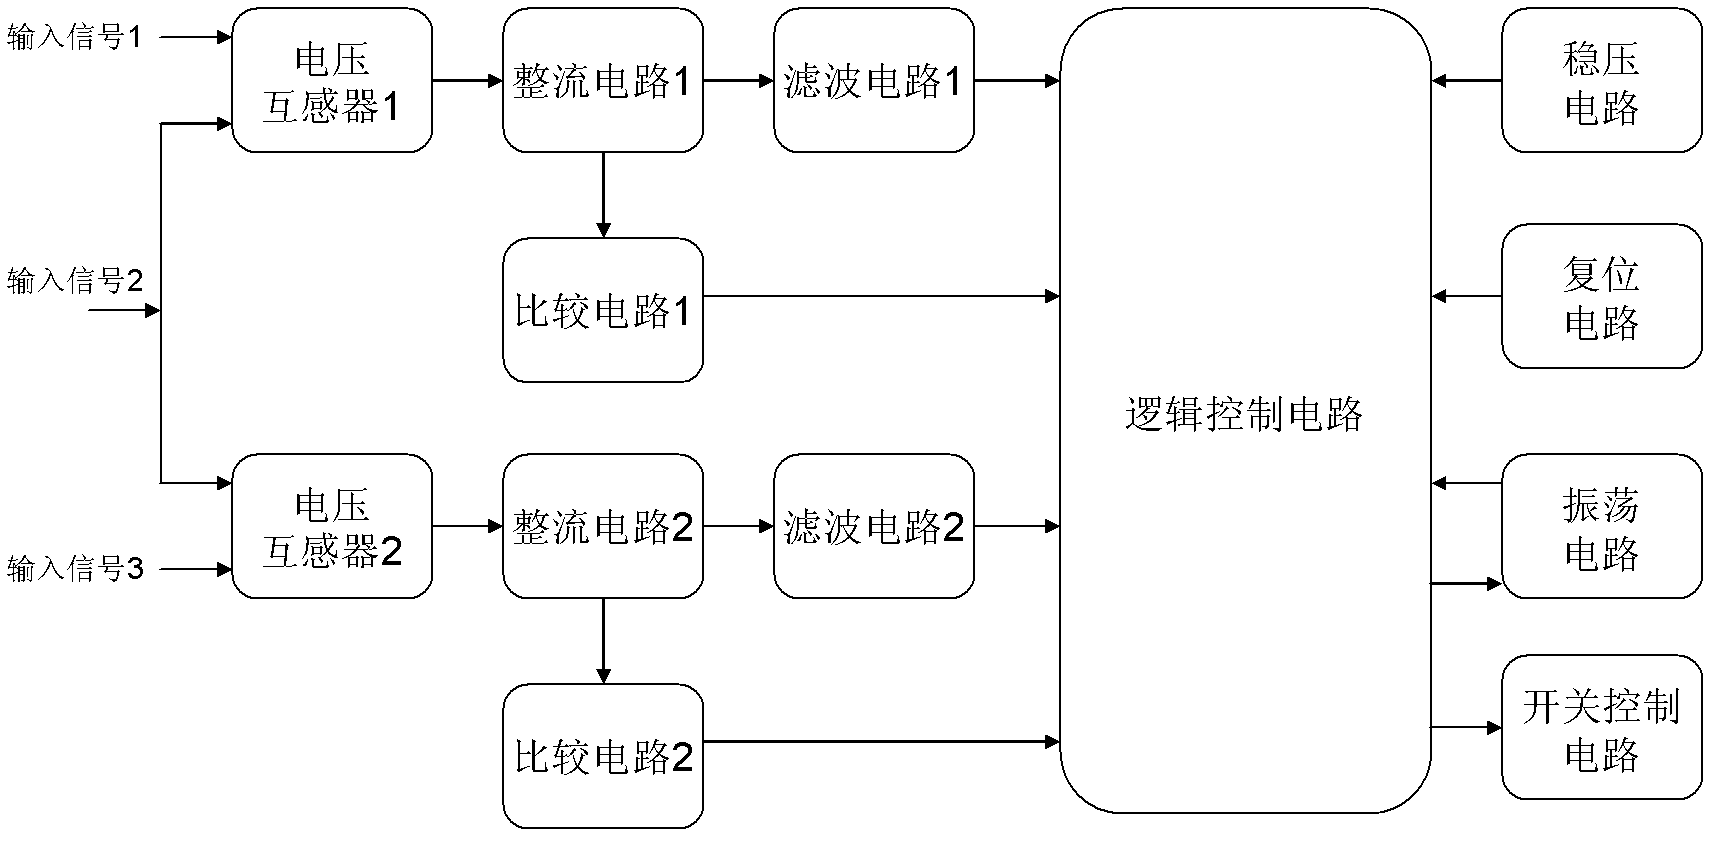 Voltage and phase sequence protection circuit